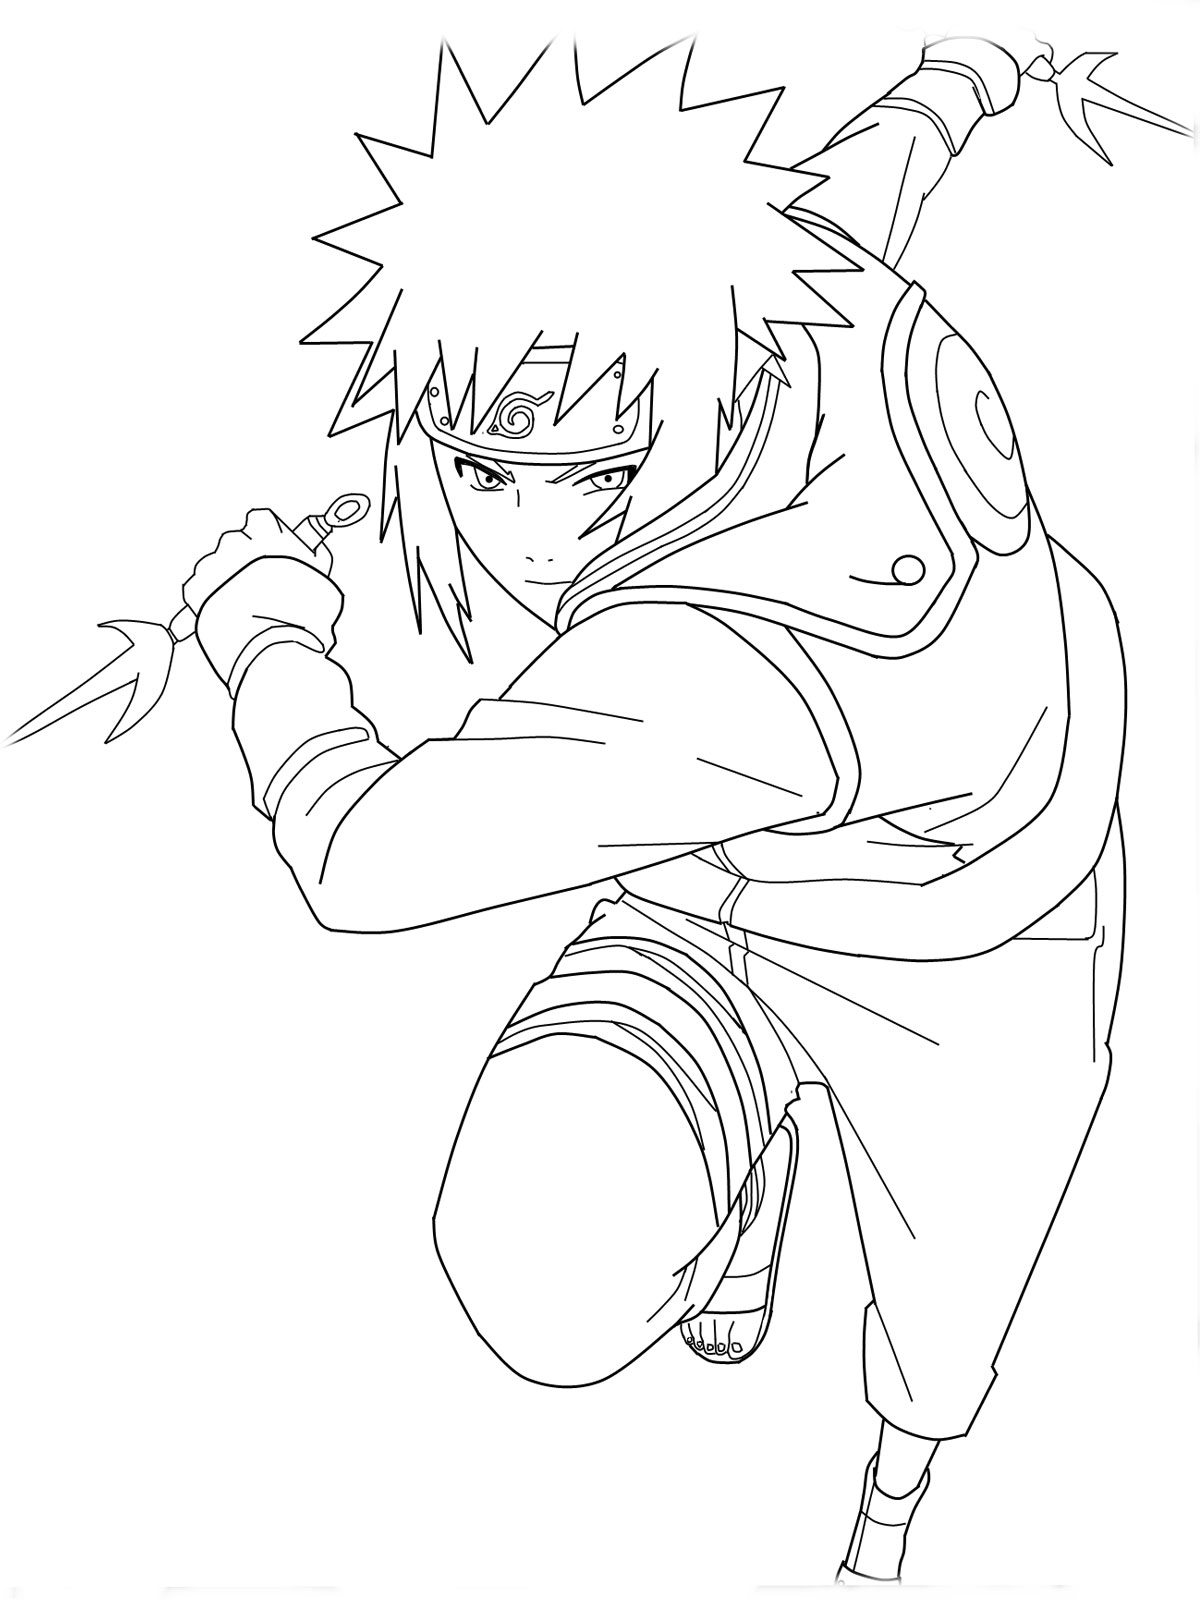 Namikaze Minato Anime Coloring Page - Free Printable Coloring Pages